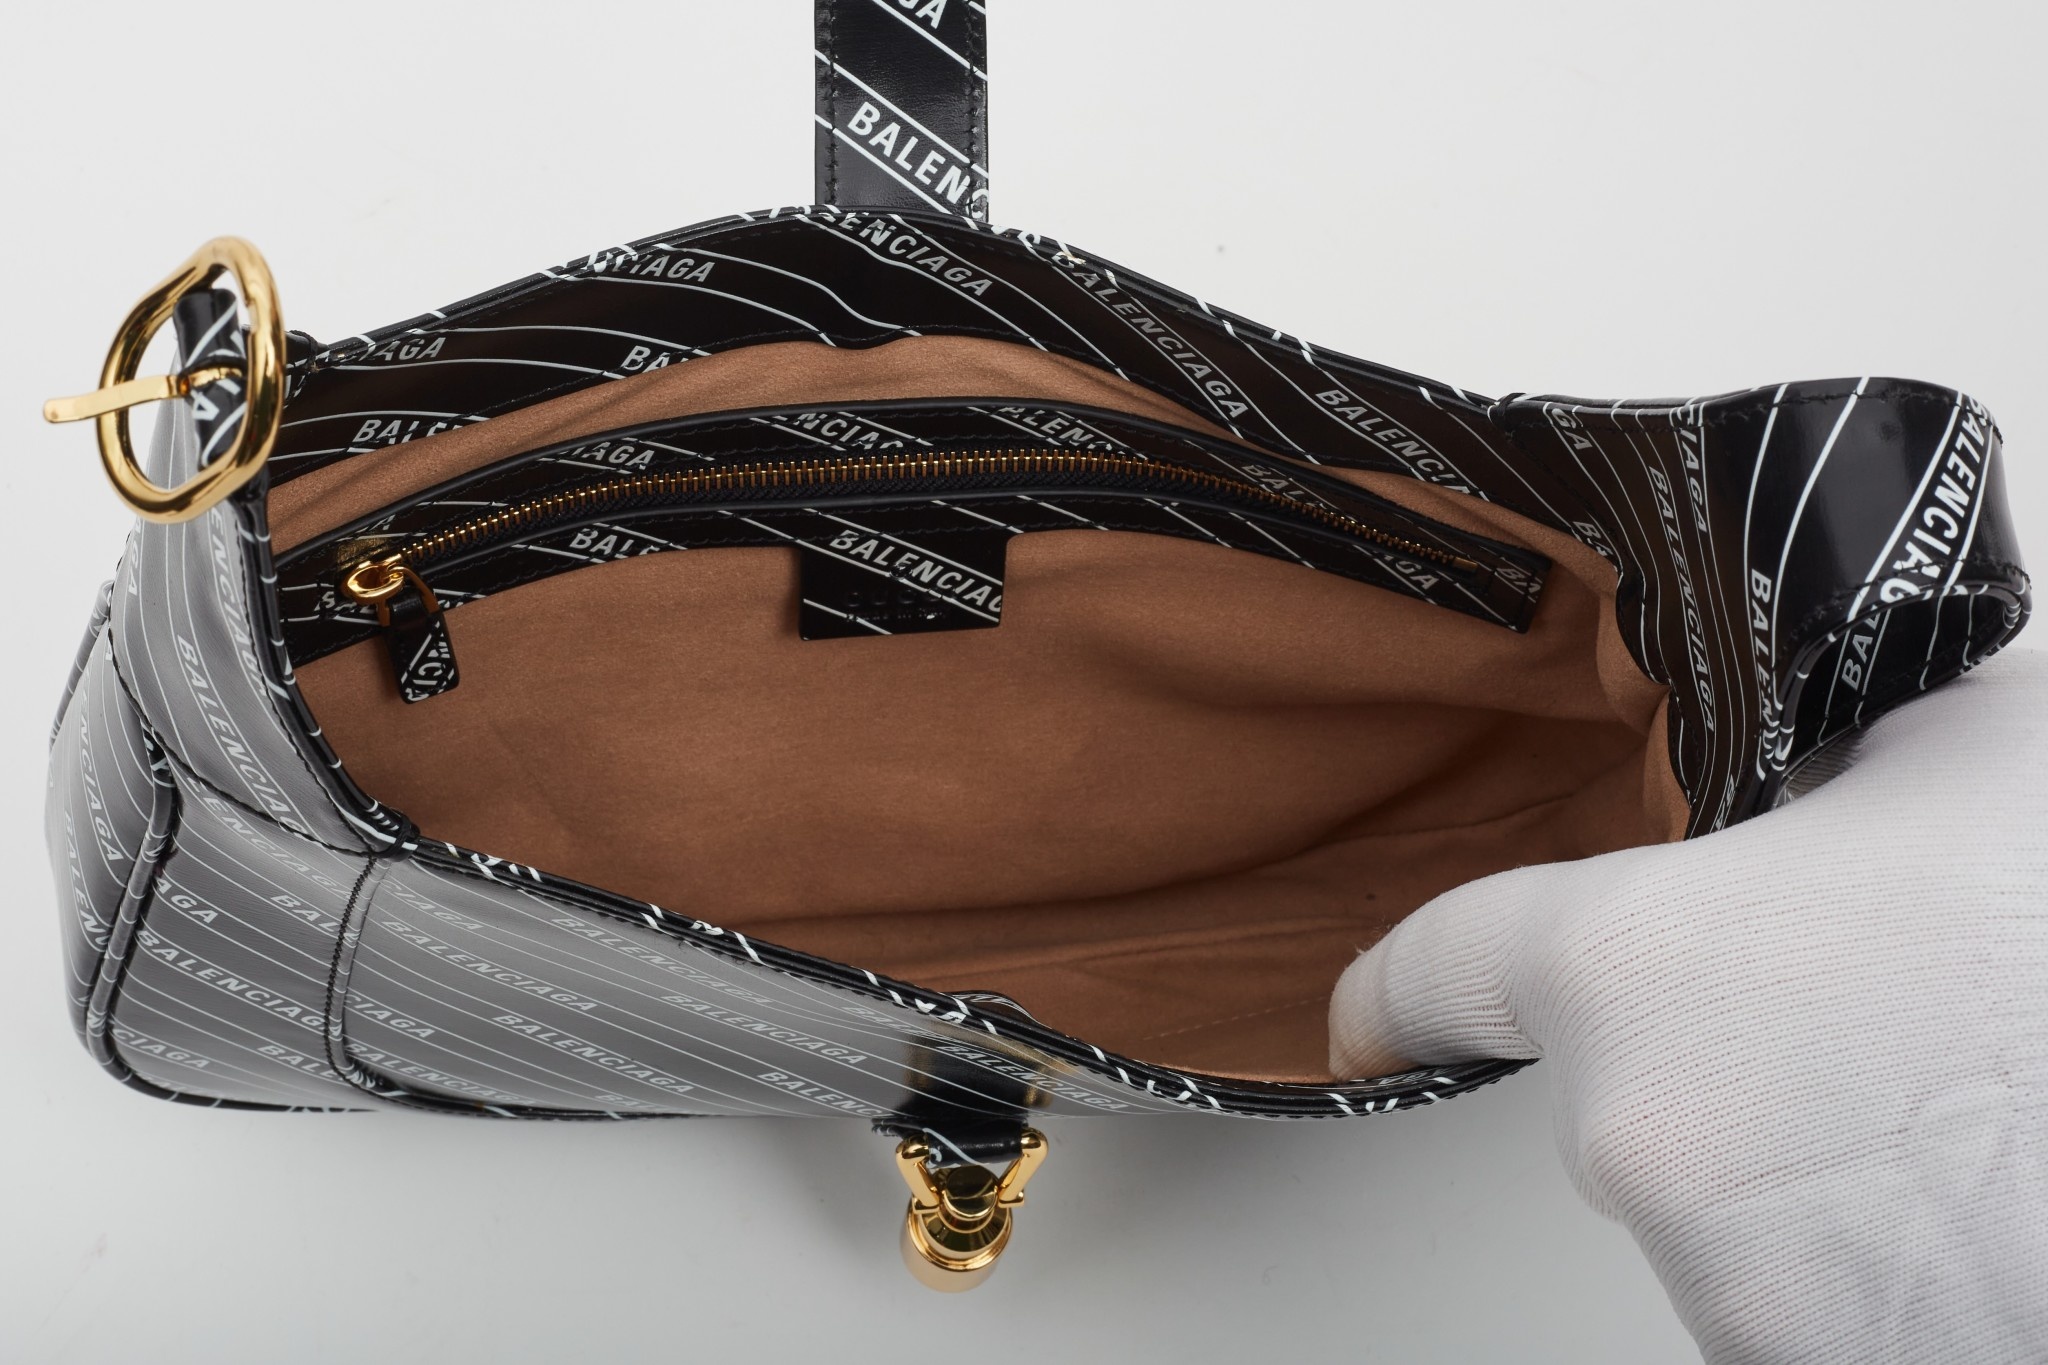 Gucci x Balenciaga “Hacker Project”: Not Just Another Collaboration, Handbags and Accessories